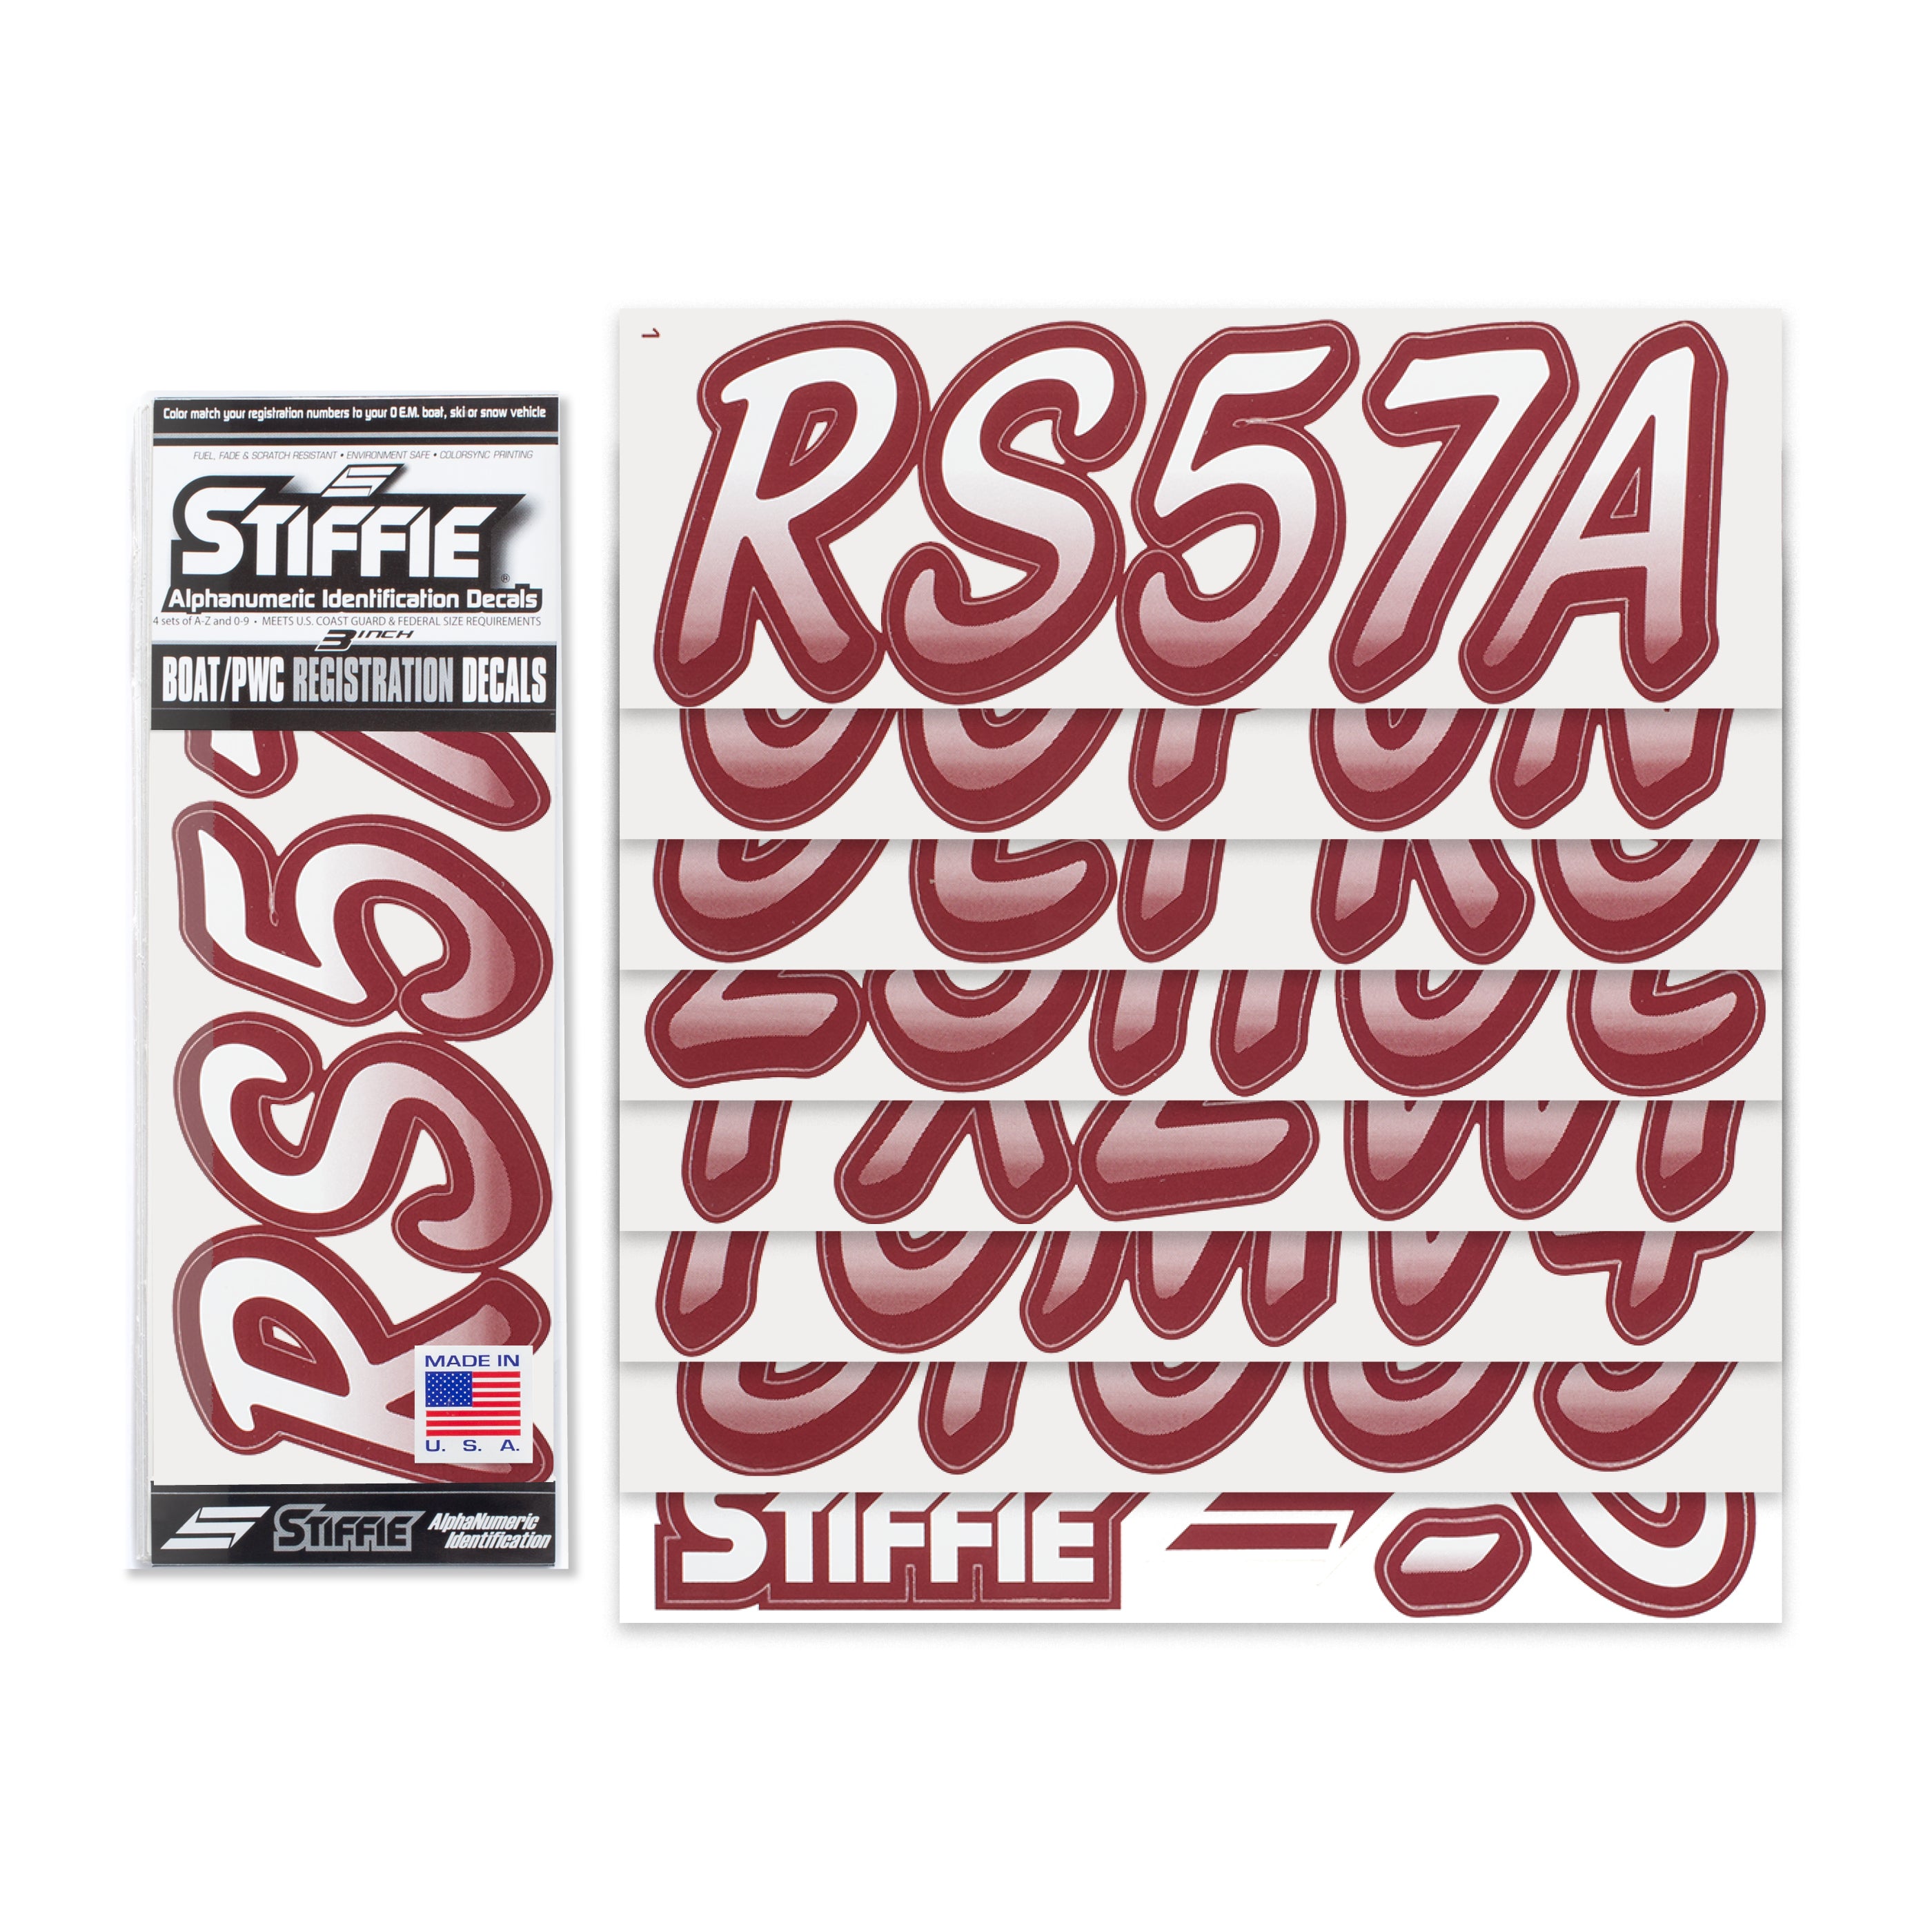 Stiffie Whipline White/Burgundy 3" Alpha-Numeric Registration Identification Numbers Stickers Decals for Boats & Personal Watercraft